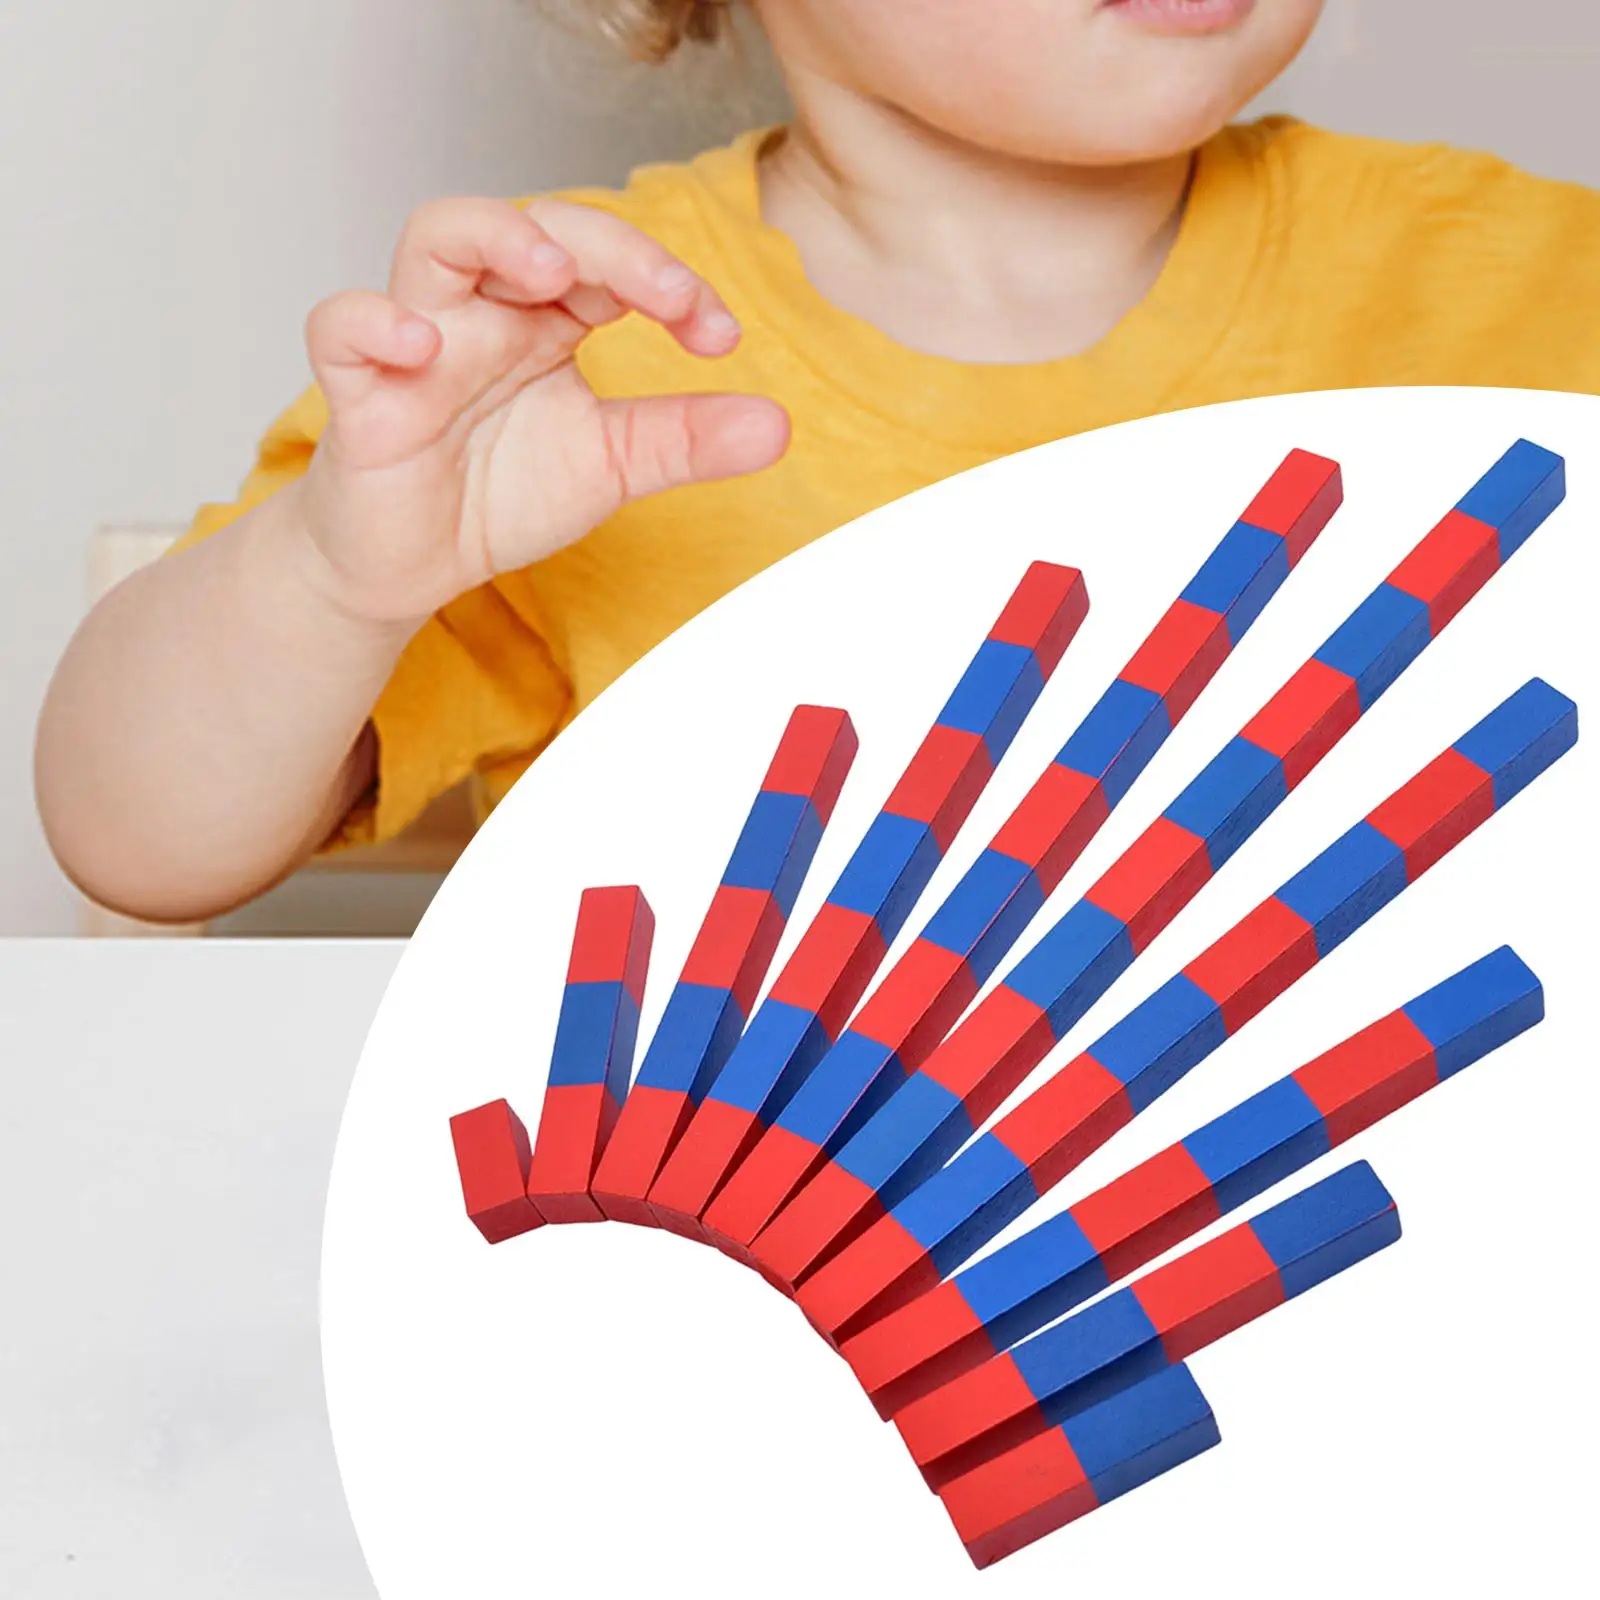 Wood Montessori Numerical Rods Counting Sticks Sensorial Materials Matching Game Practical Early Childhood Education for Party